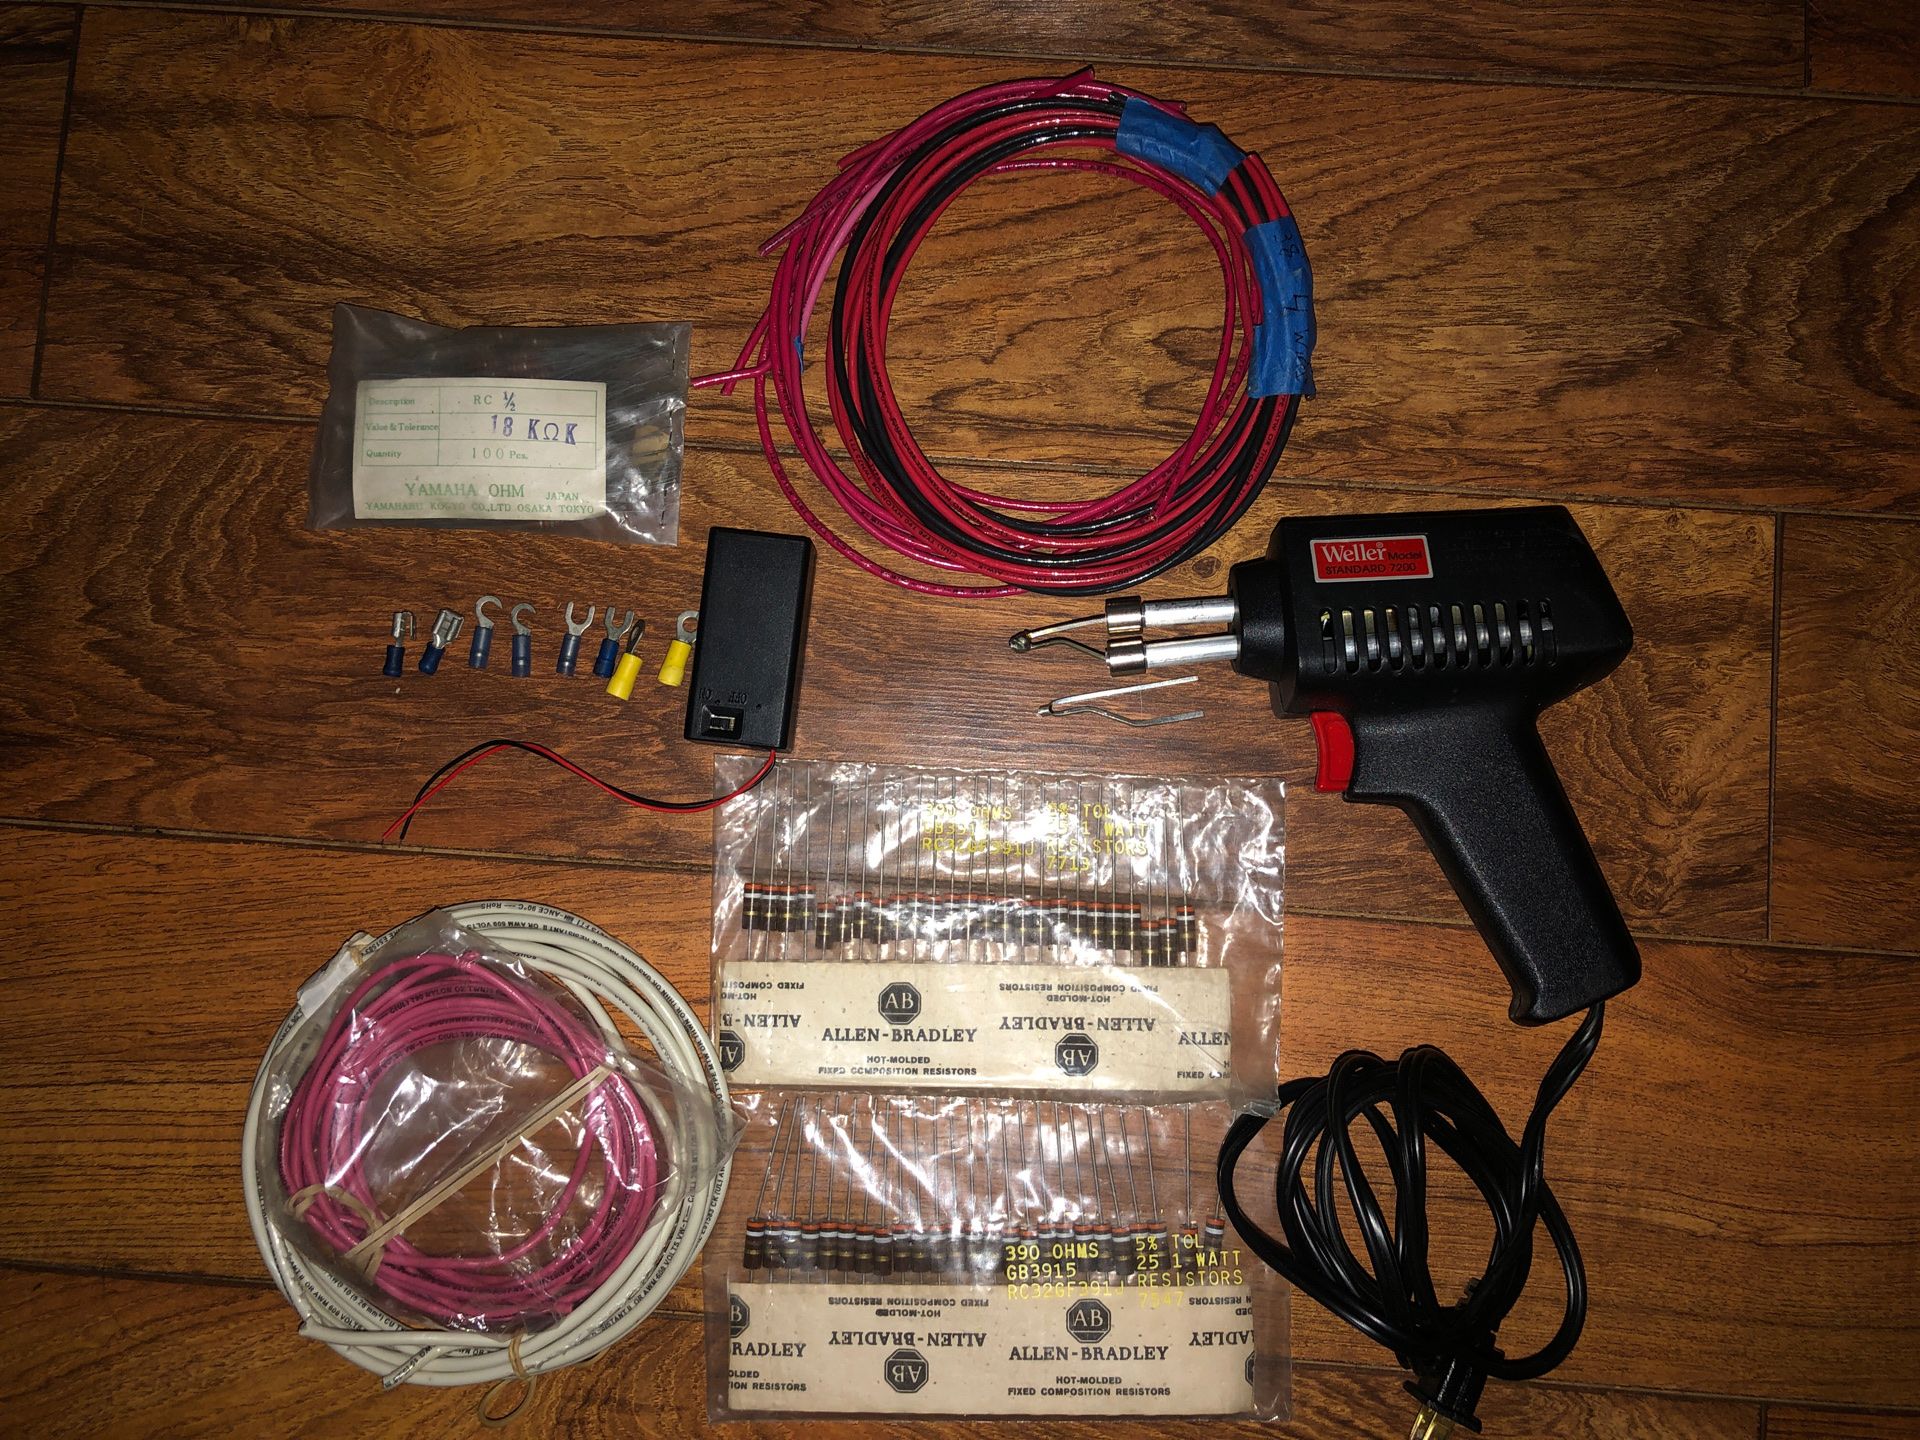 DIY electric kit Soldering iron heavy duty spare wire 150 resistors & Misc components electronic kits ham radio